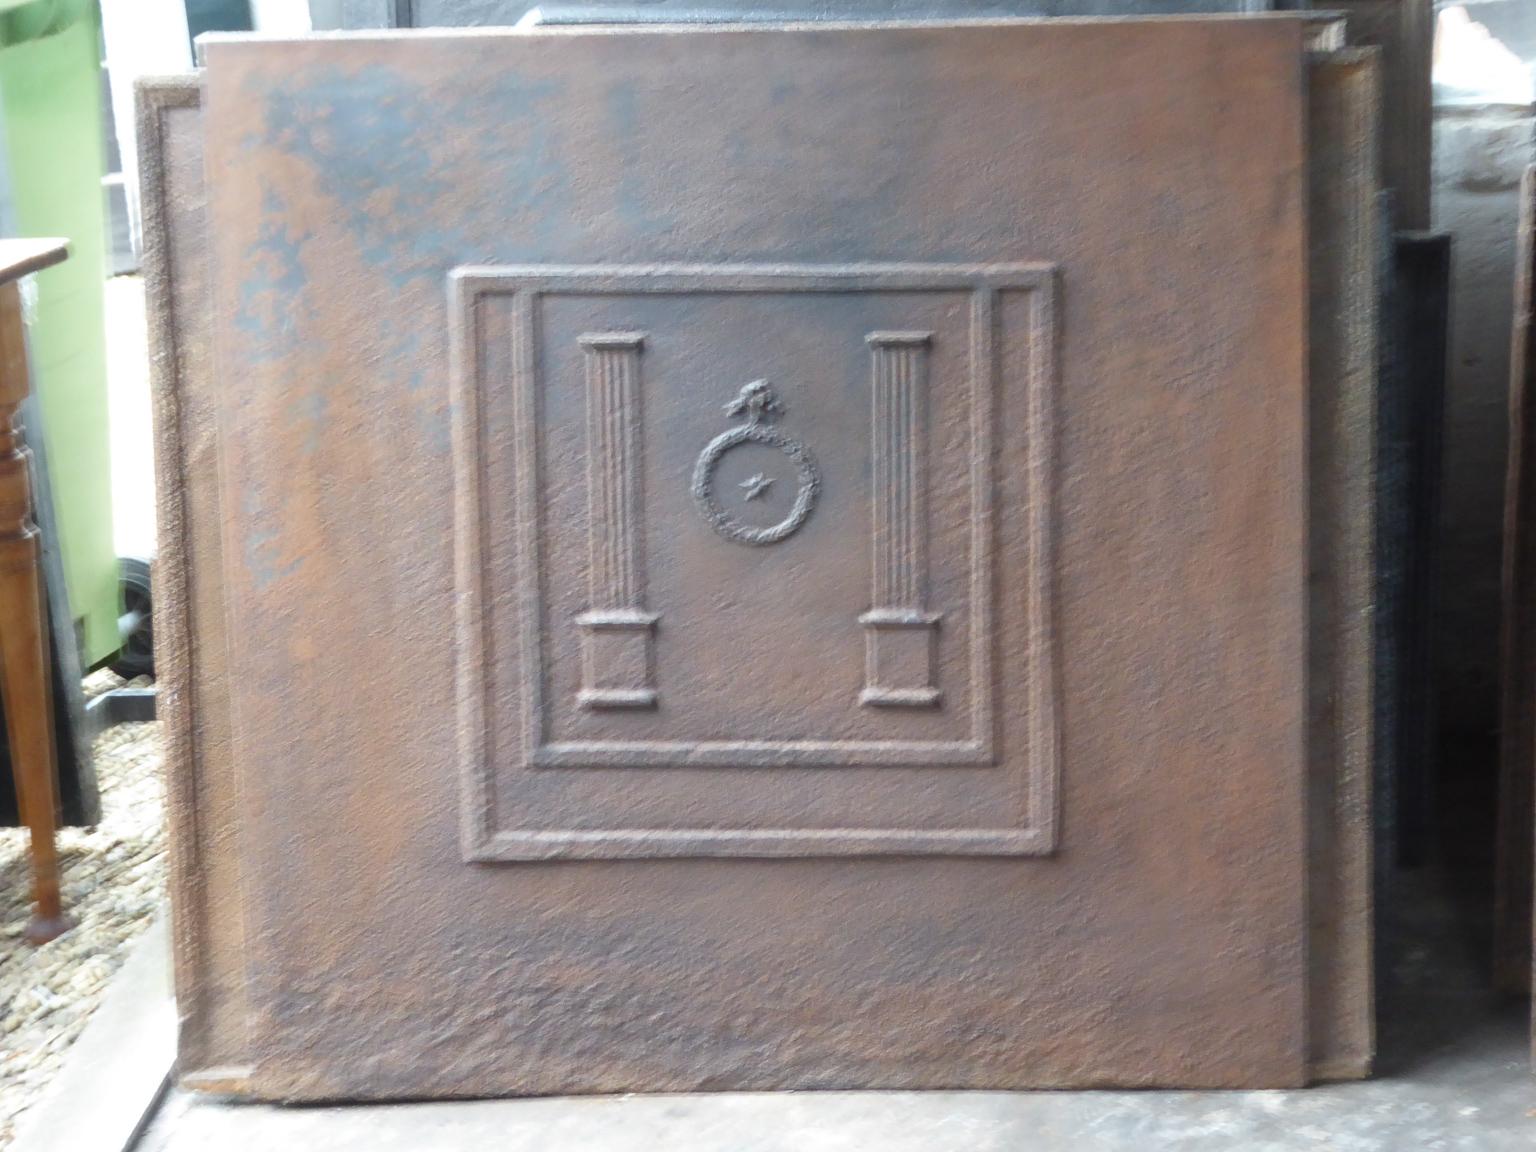 19th century French neoclassical fireback with two pillars of freedom. The pillars symbolize the value liberty, one of the three values of the French revolution. 

The fireback is made of cast iron and has a natural brown patina. Upon request it can